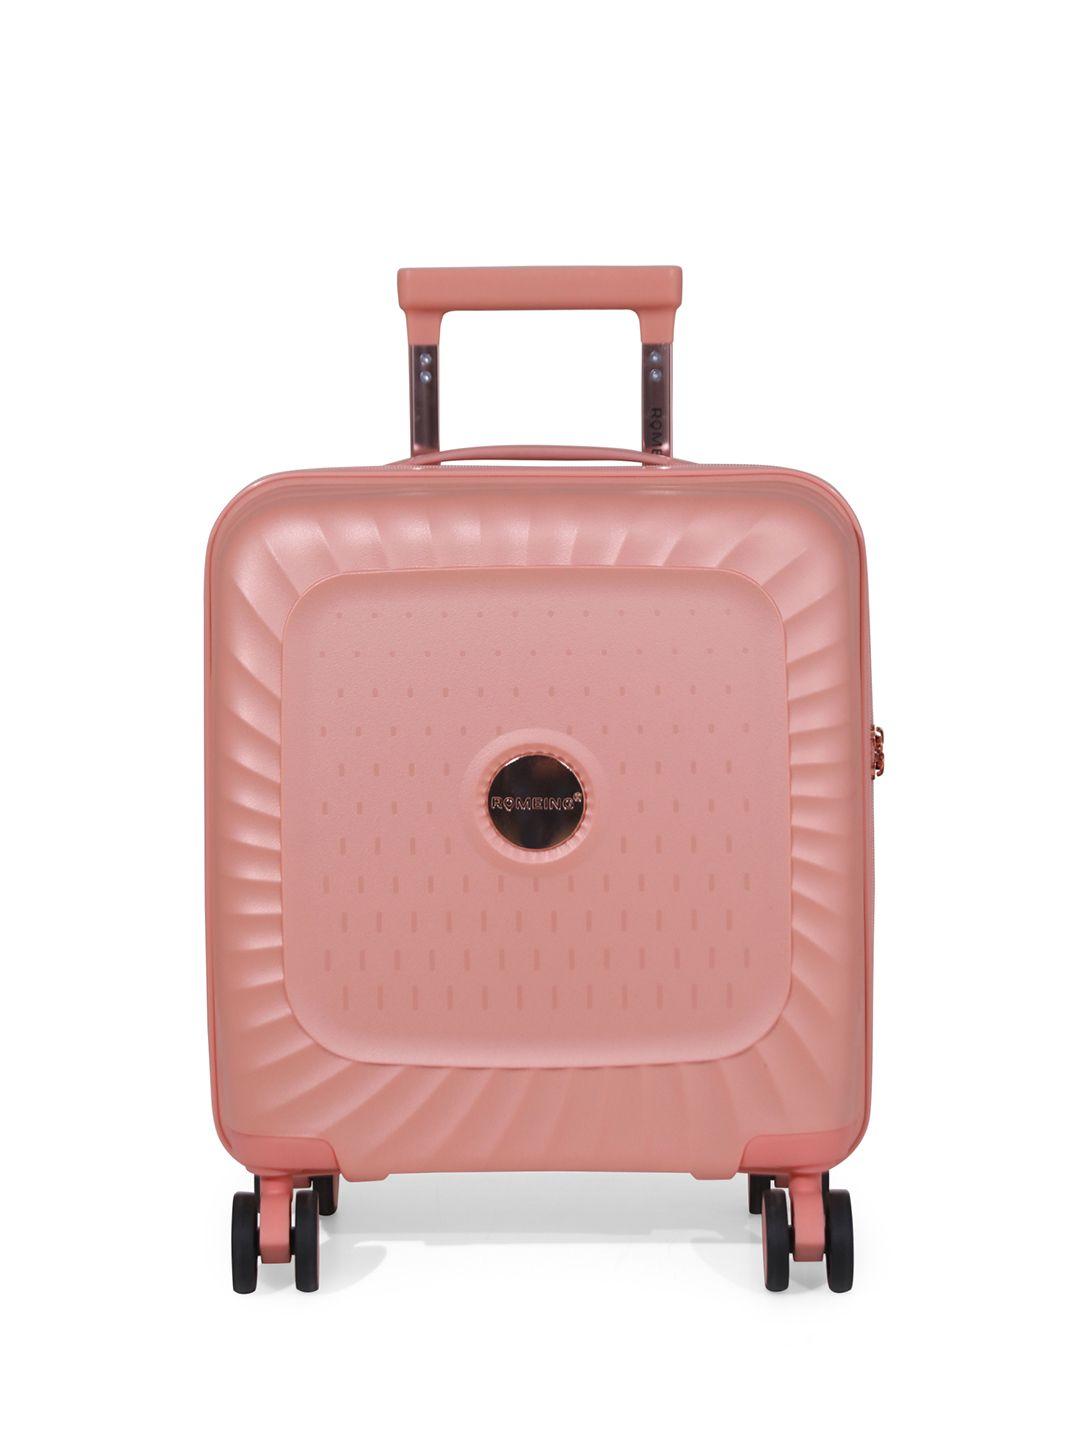 romeing sicily textured cabin hard-sided trolley bag